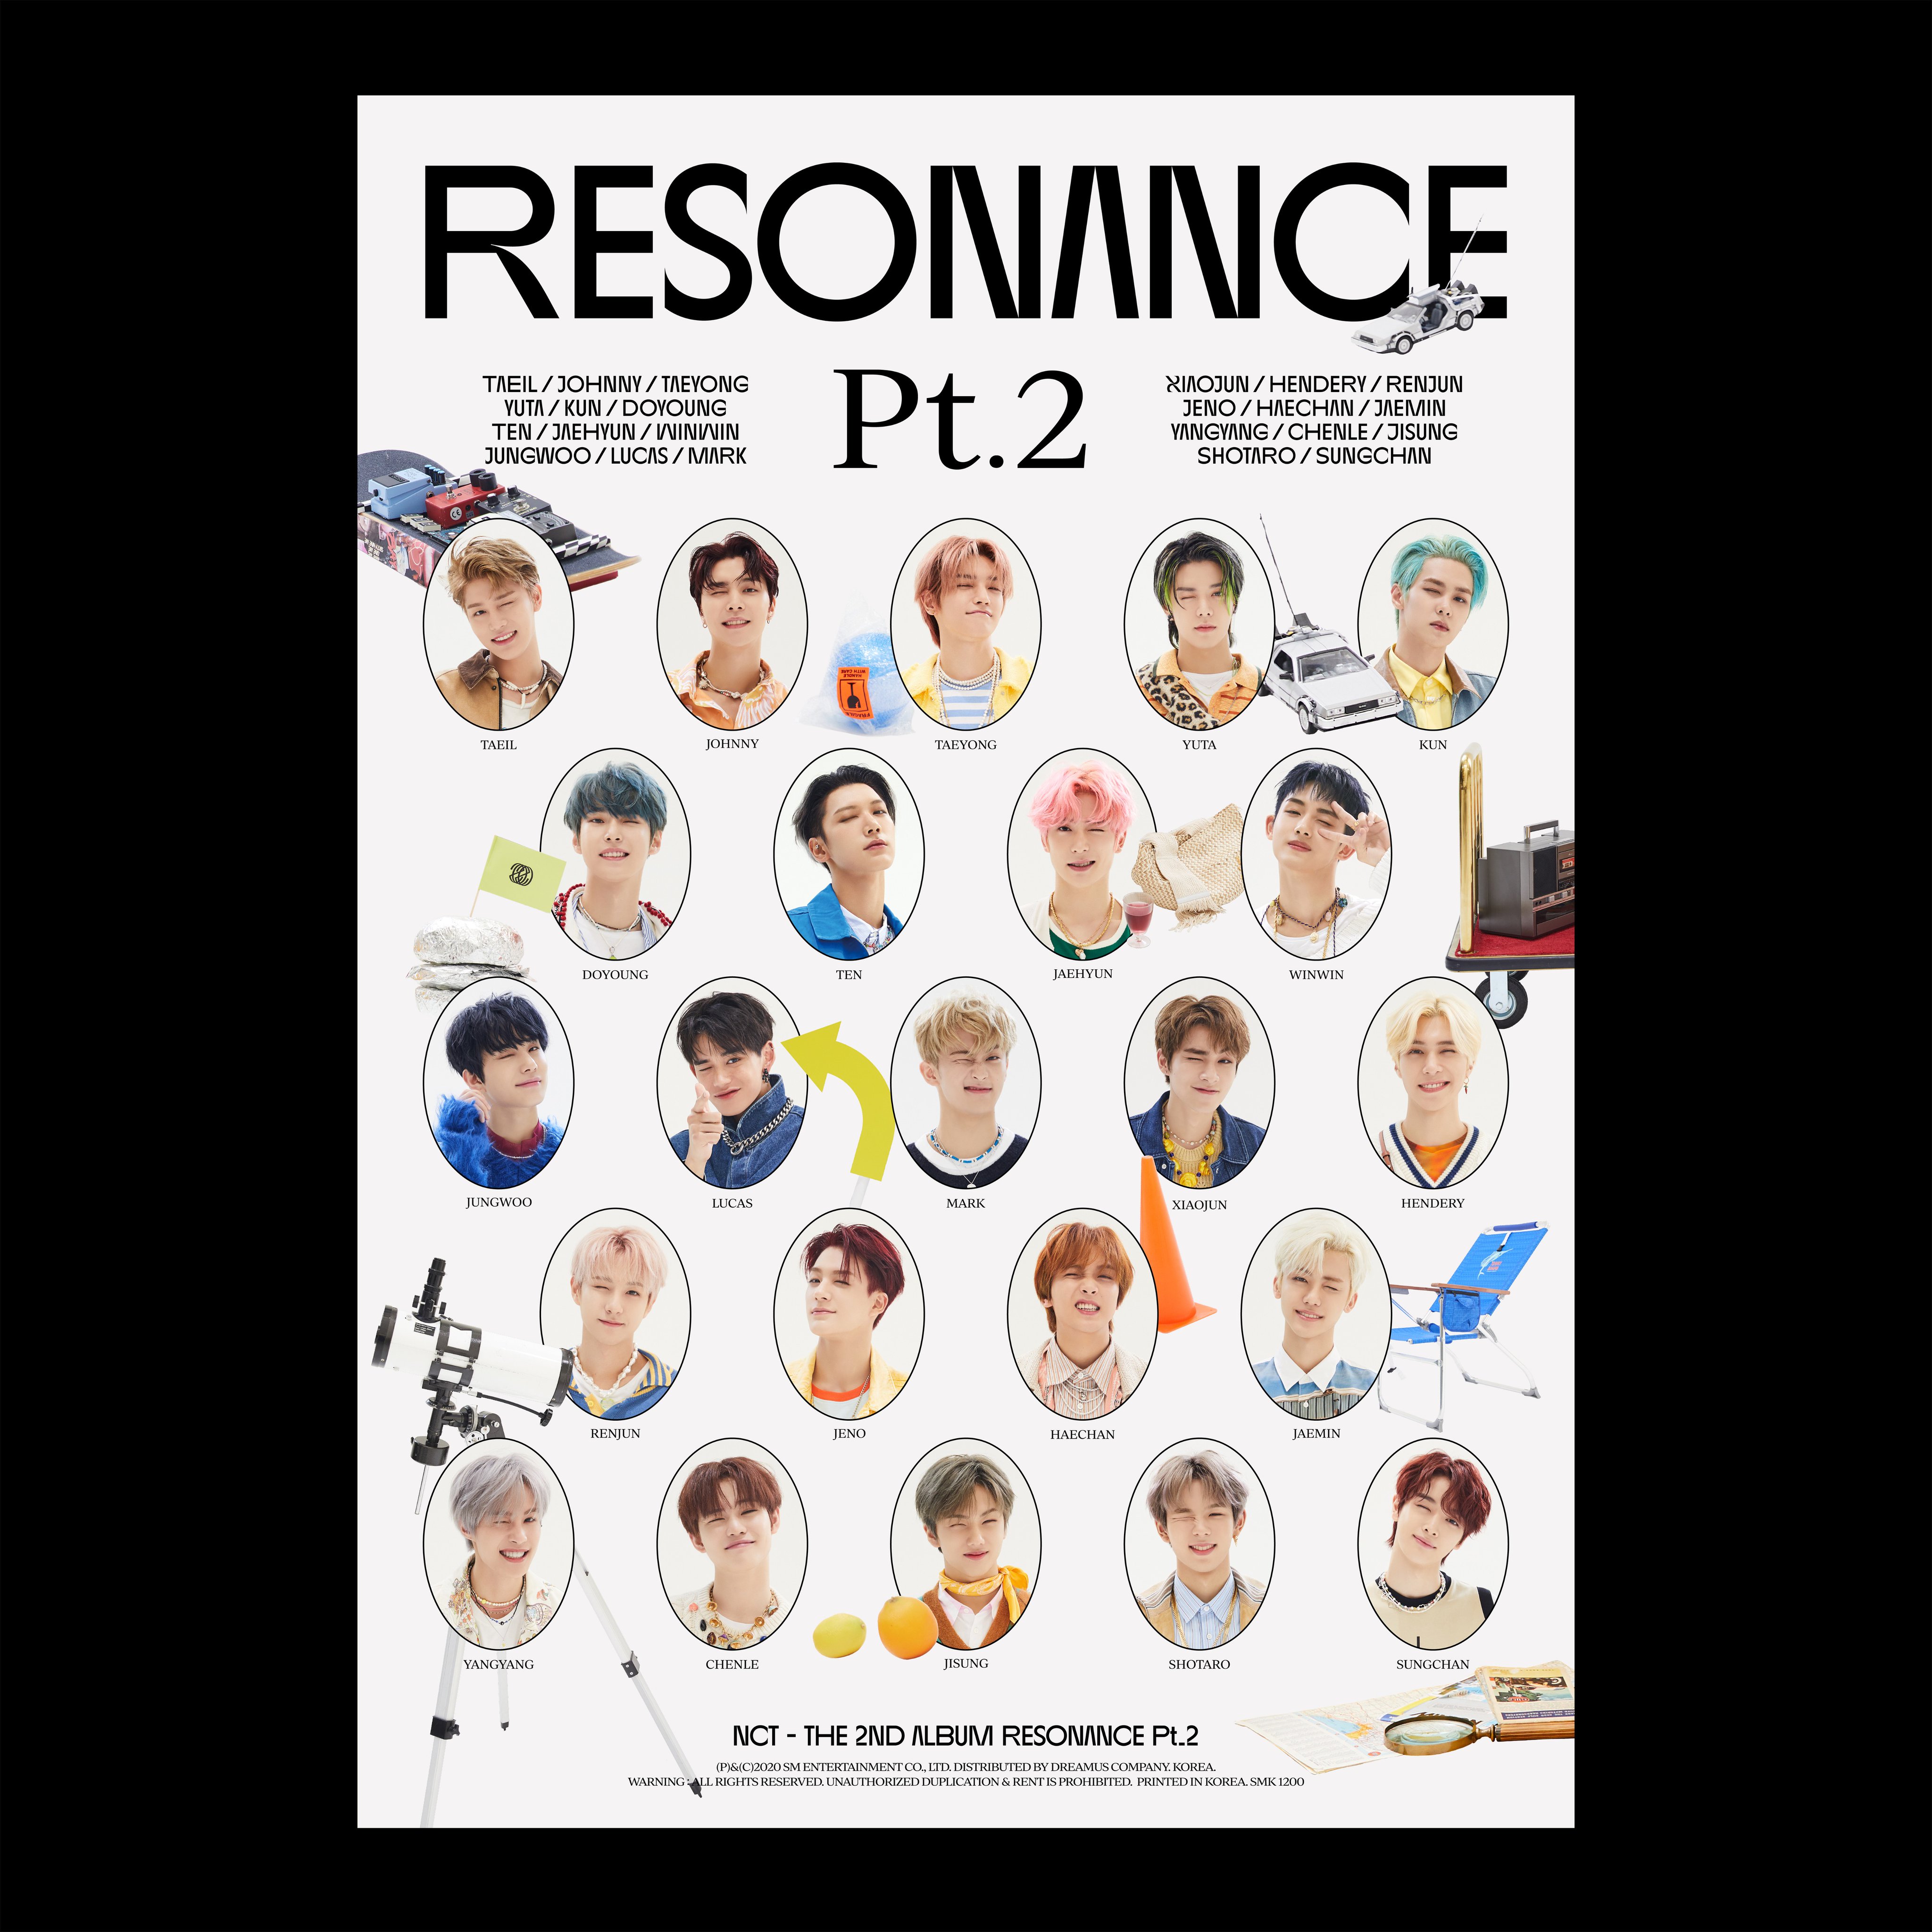 nct-unveils-detailed-schedule-and-tracklist-for-upcoming-comeback-with-resonance-pt2-2